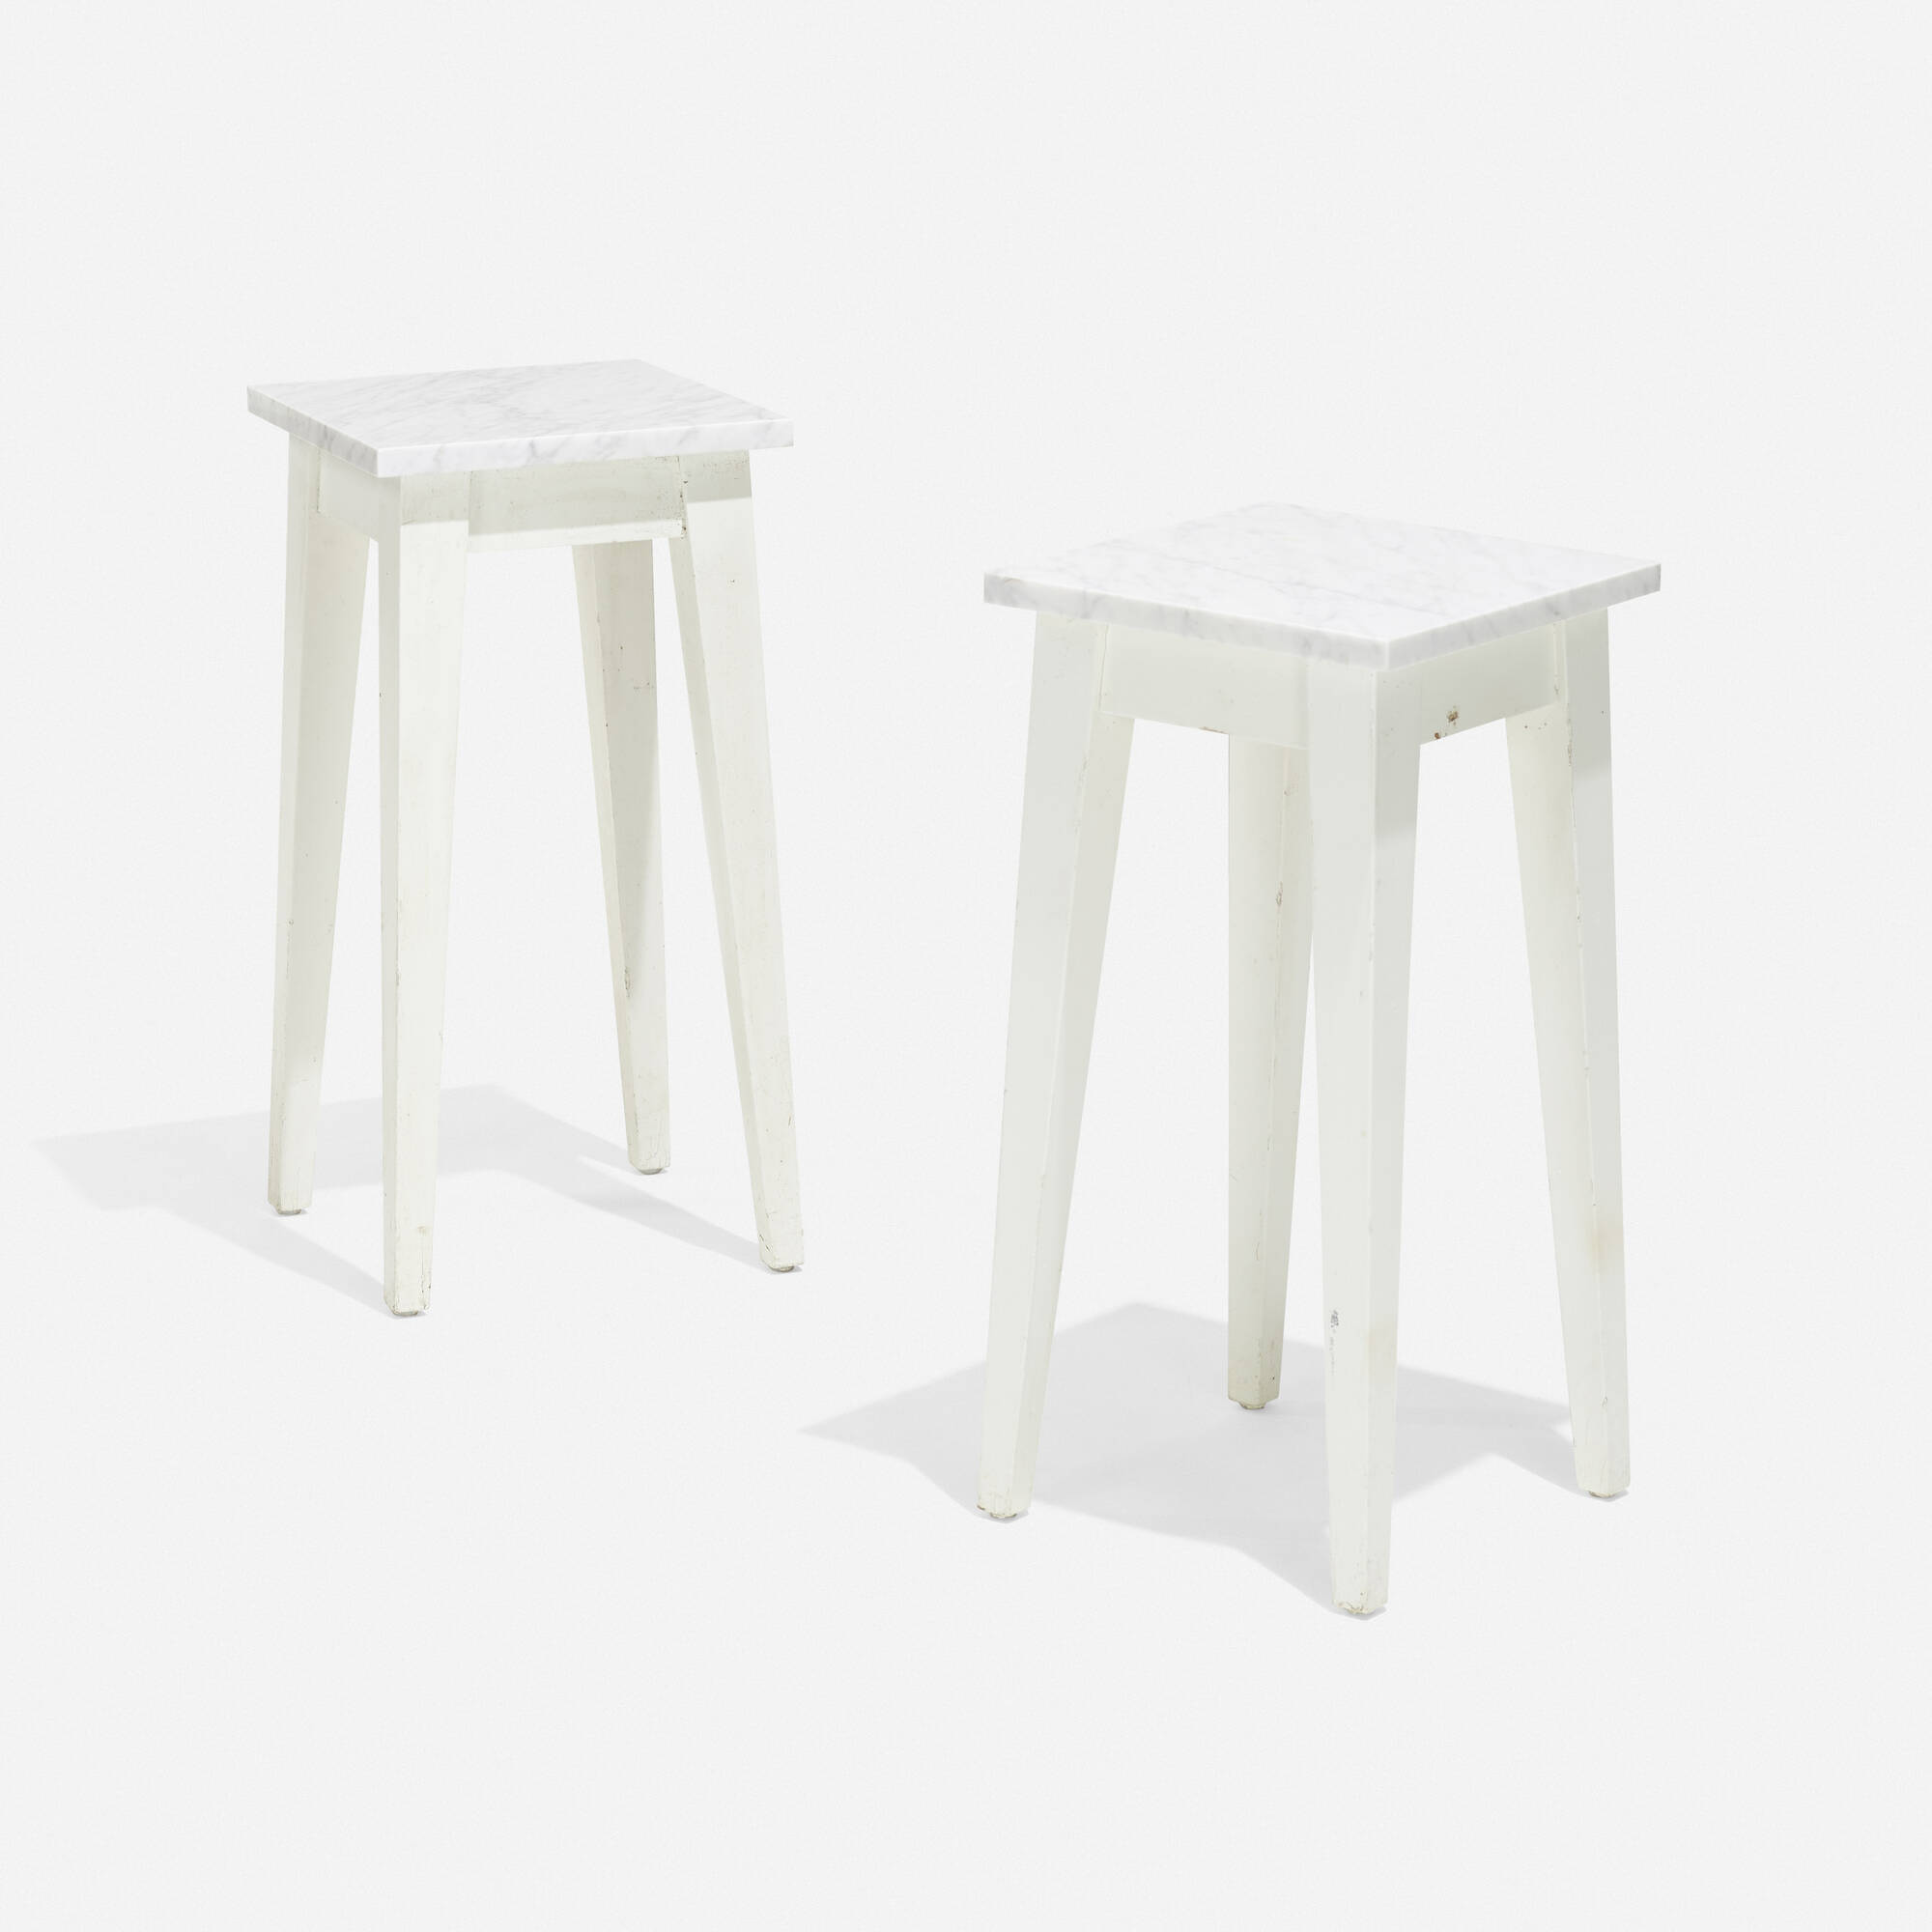 shuttle Buigen banjo 192: PHILIPPE STARCK, Occasional tables from the Delano Hotel, pair <  Design and Library from the Collection of Mark McDonald, 13 January 2022 <  Auctions | Wright: Auctions of Art and Design